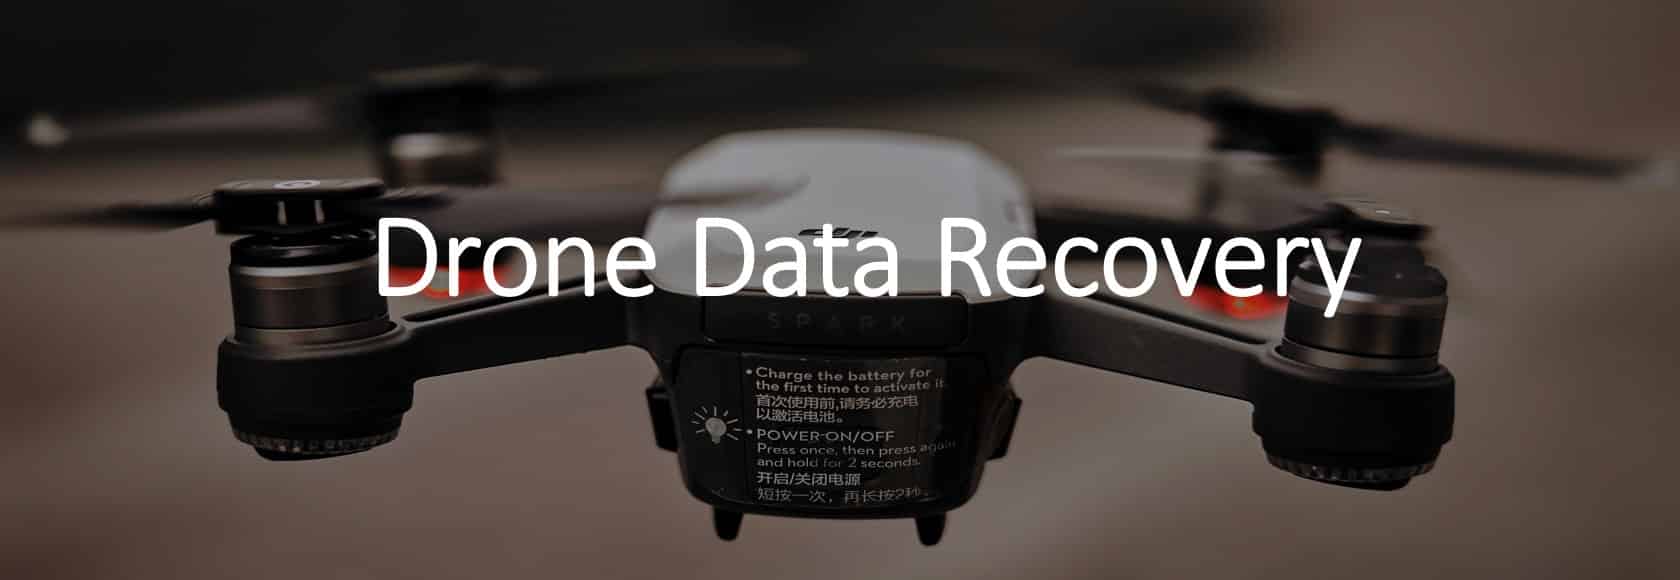 Drone Data Recovery